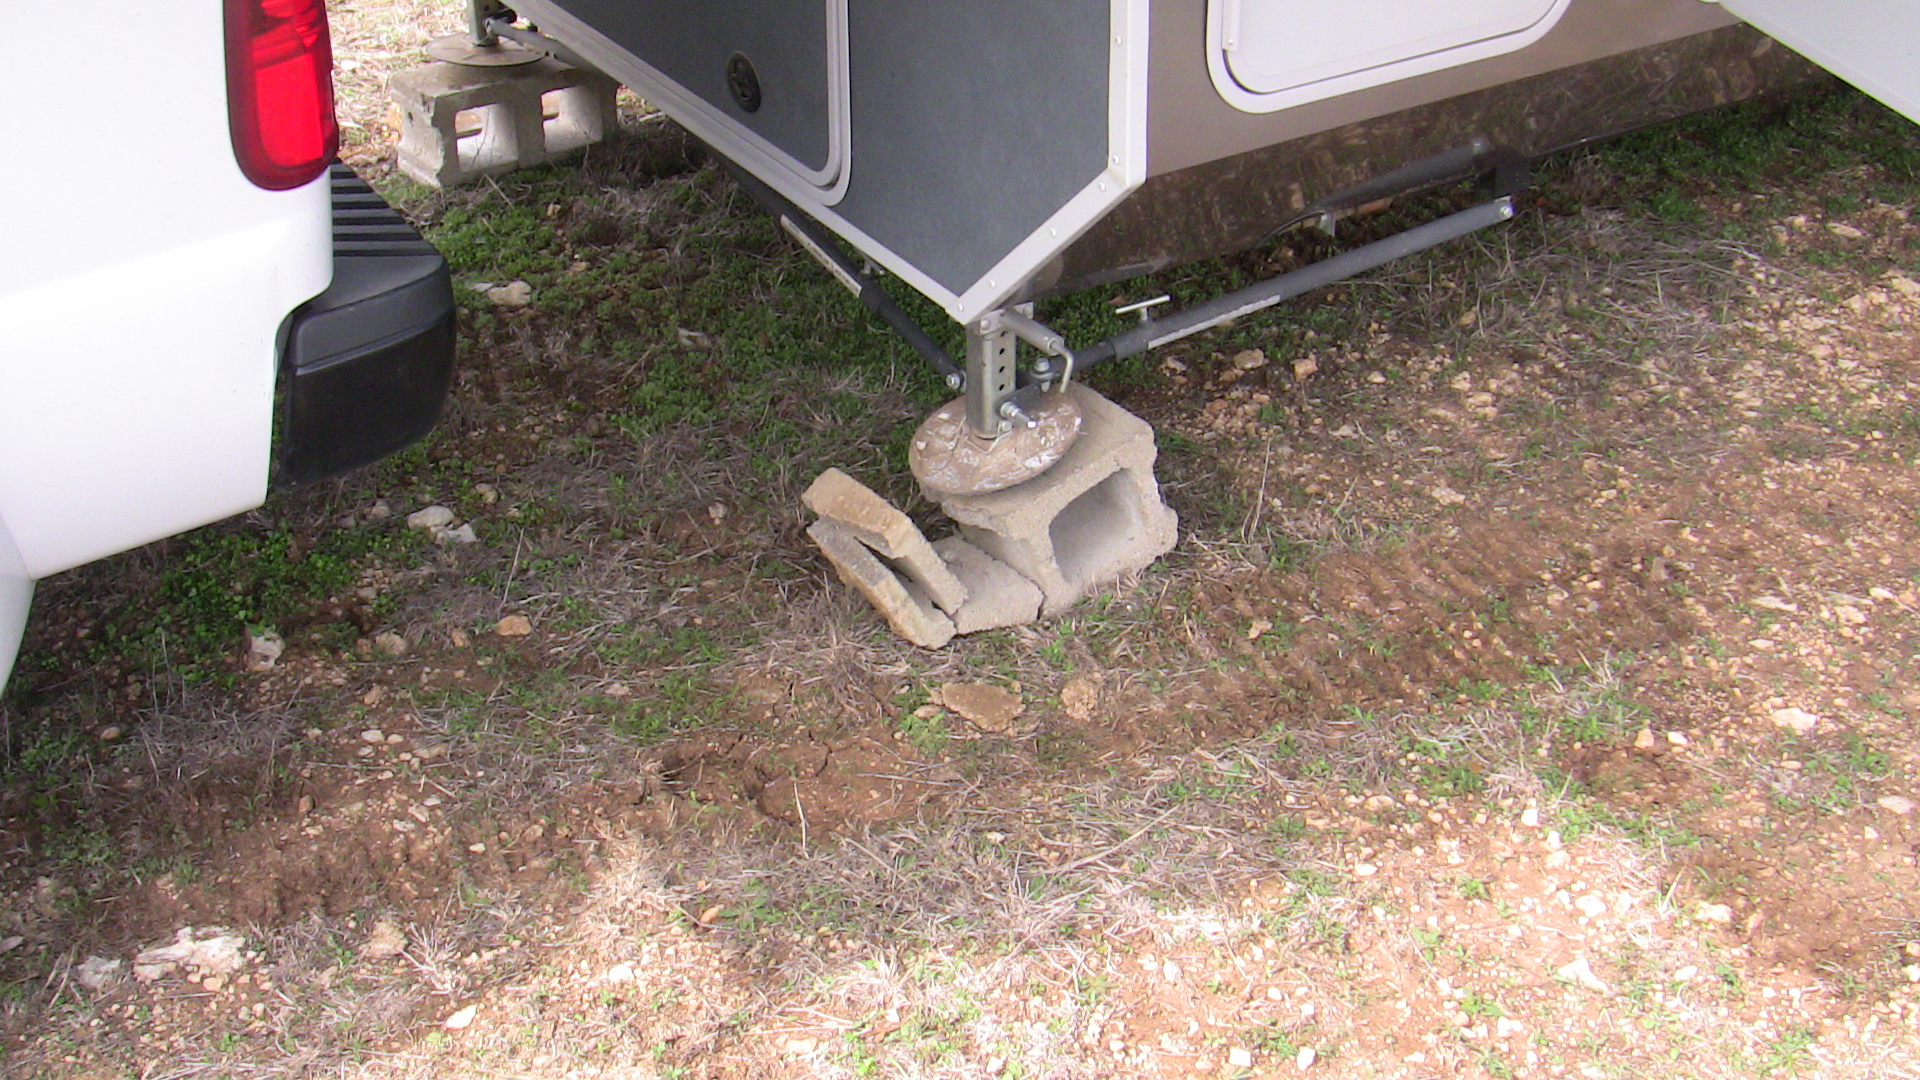 My redneck moment - Unsafe without excuses - leveling your fifth wheel RV 5th Wheel Front Jacks Not Working